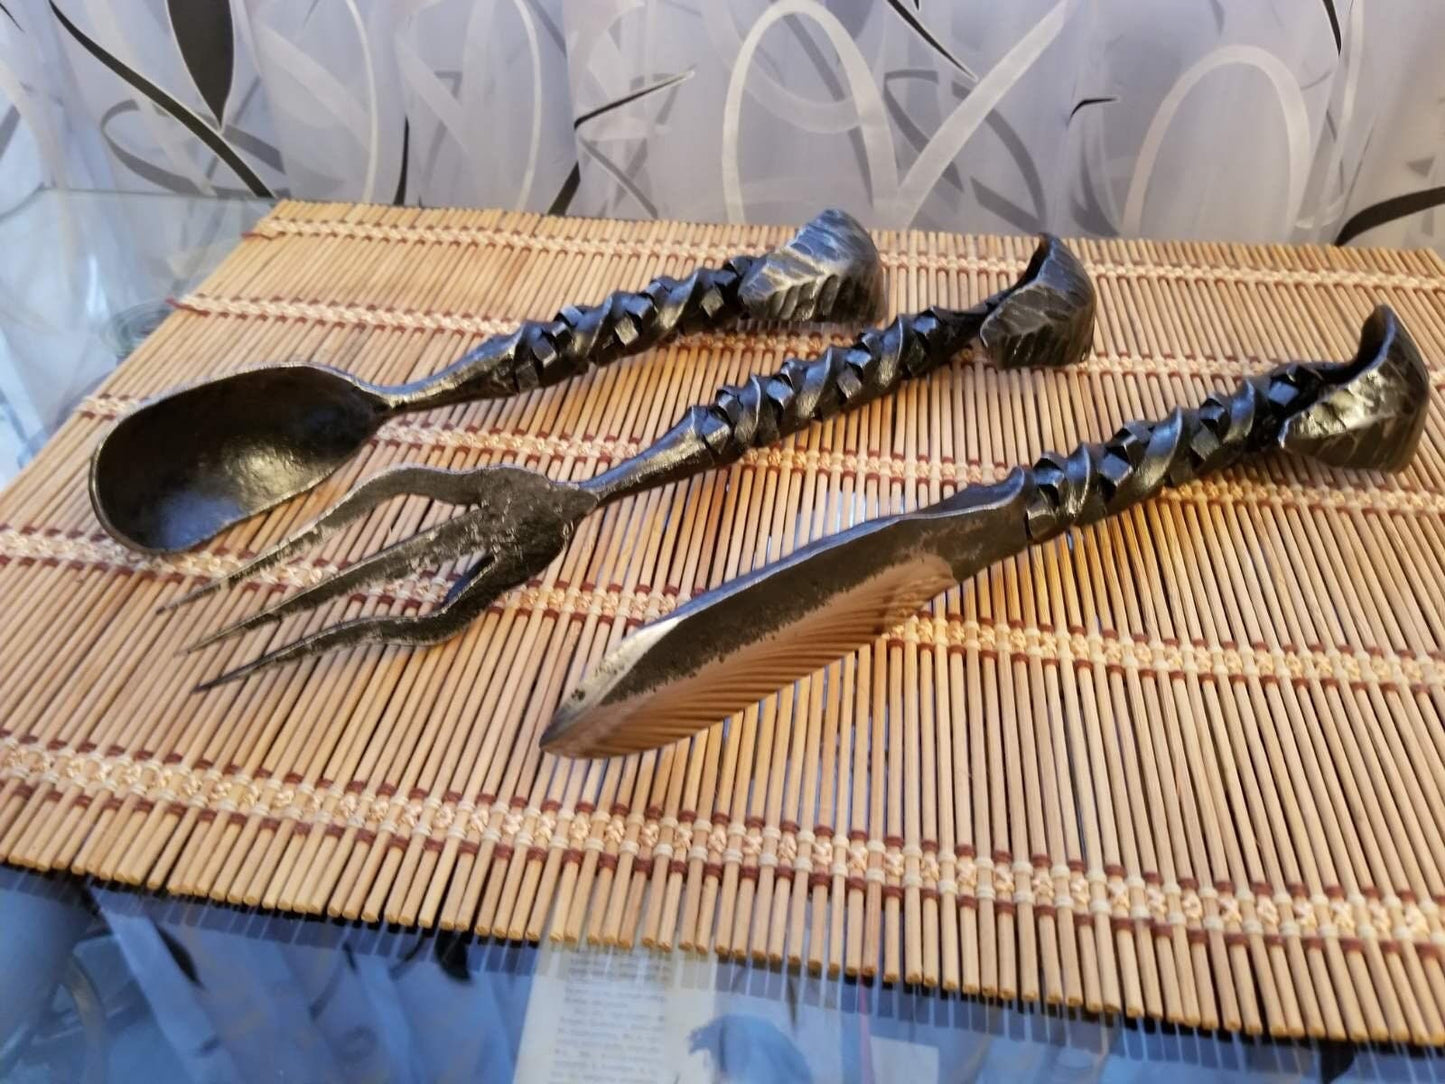 Spoon, fork, knife, cutlery, medieval, castle decor, flatware, fire poker, BBQ, dining set, birthday, anniversary, Christmas, camping, party